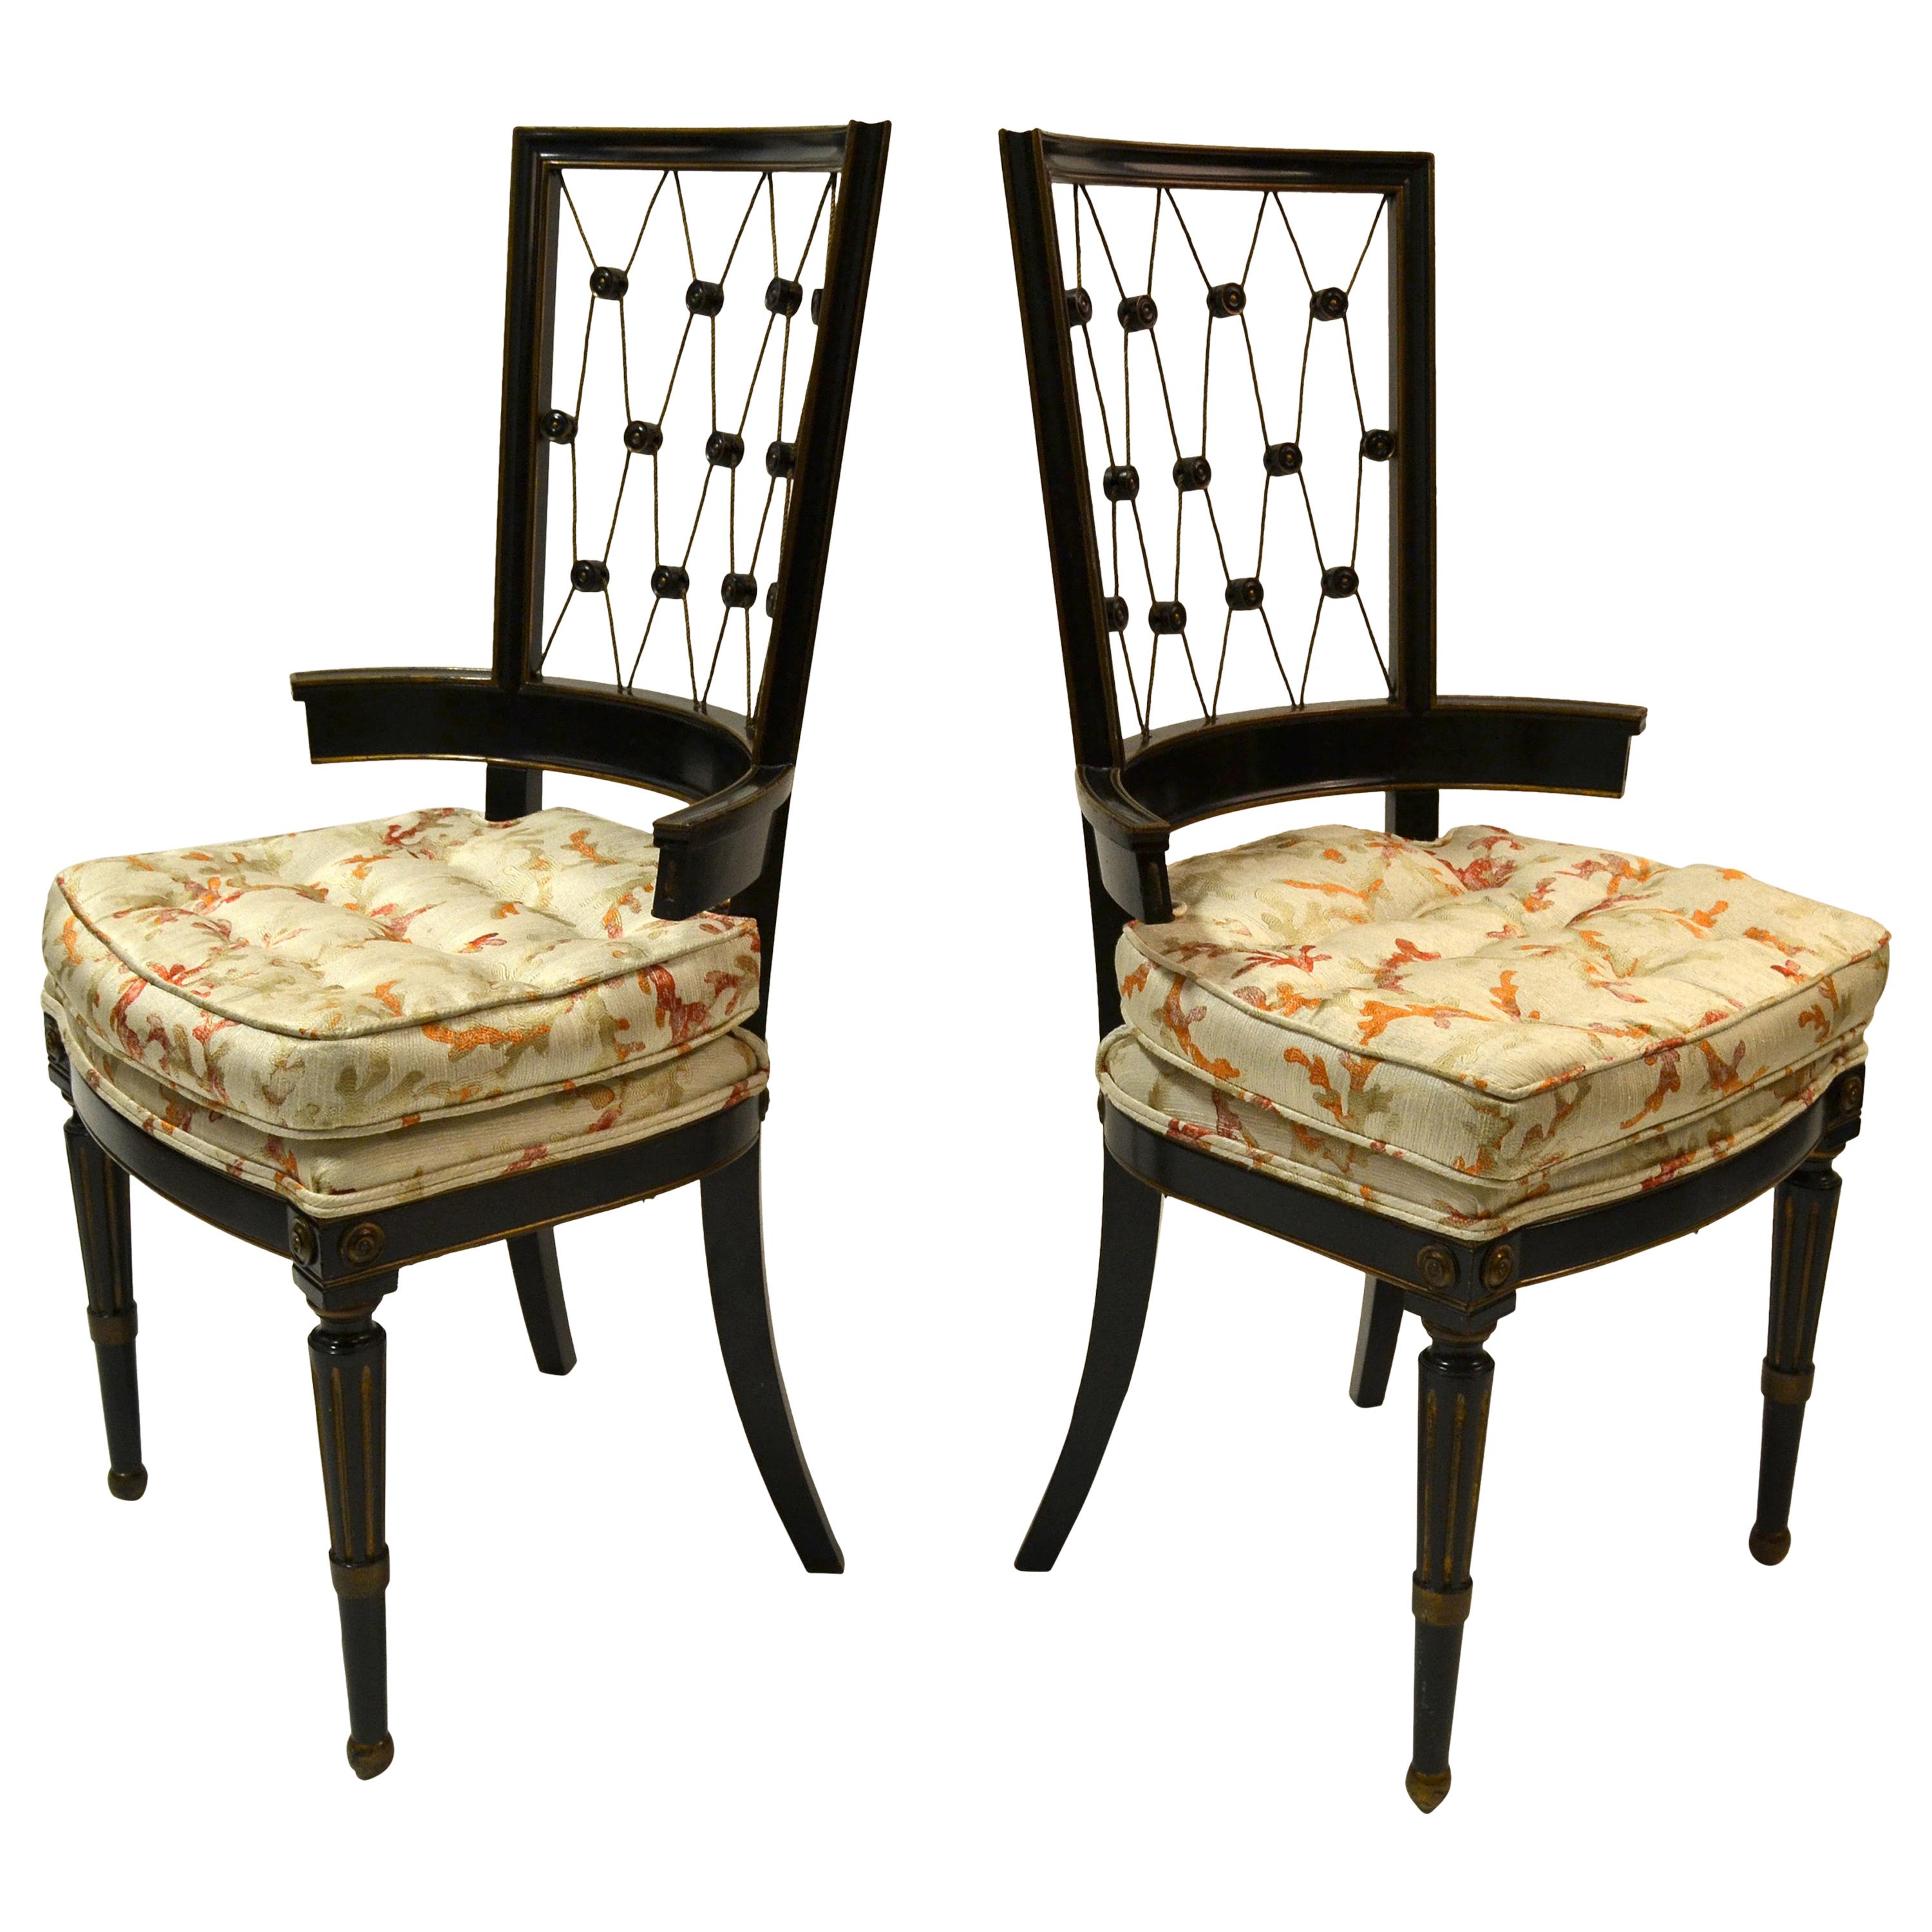 1940s American Side Chairs Intricate Diamond Pattern Back Black and Gold - Pair For Sale